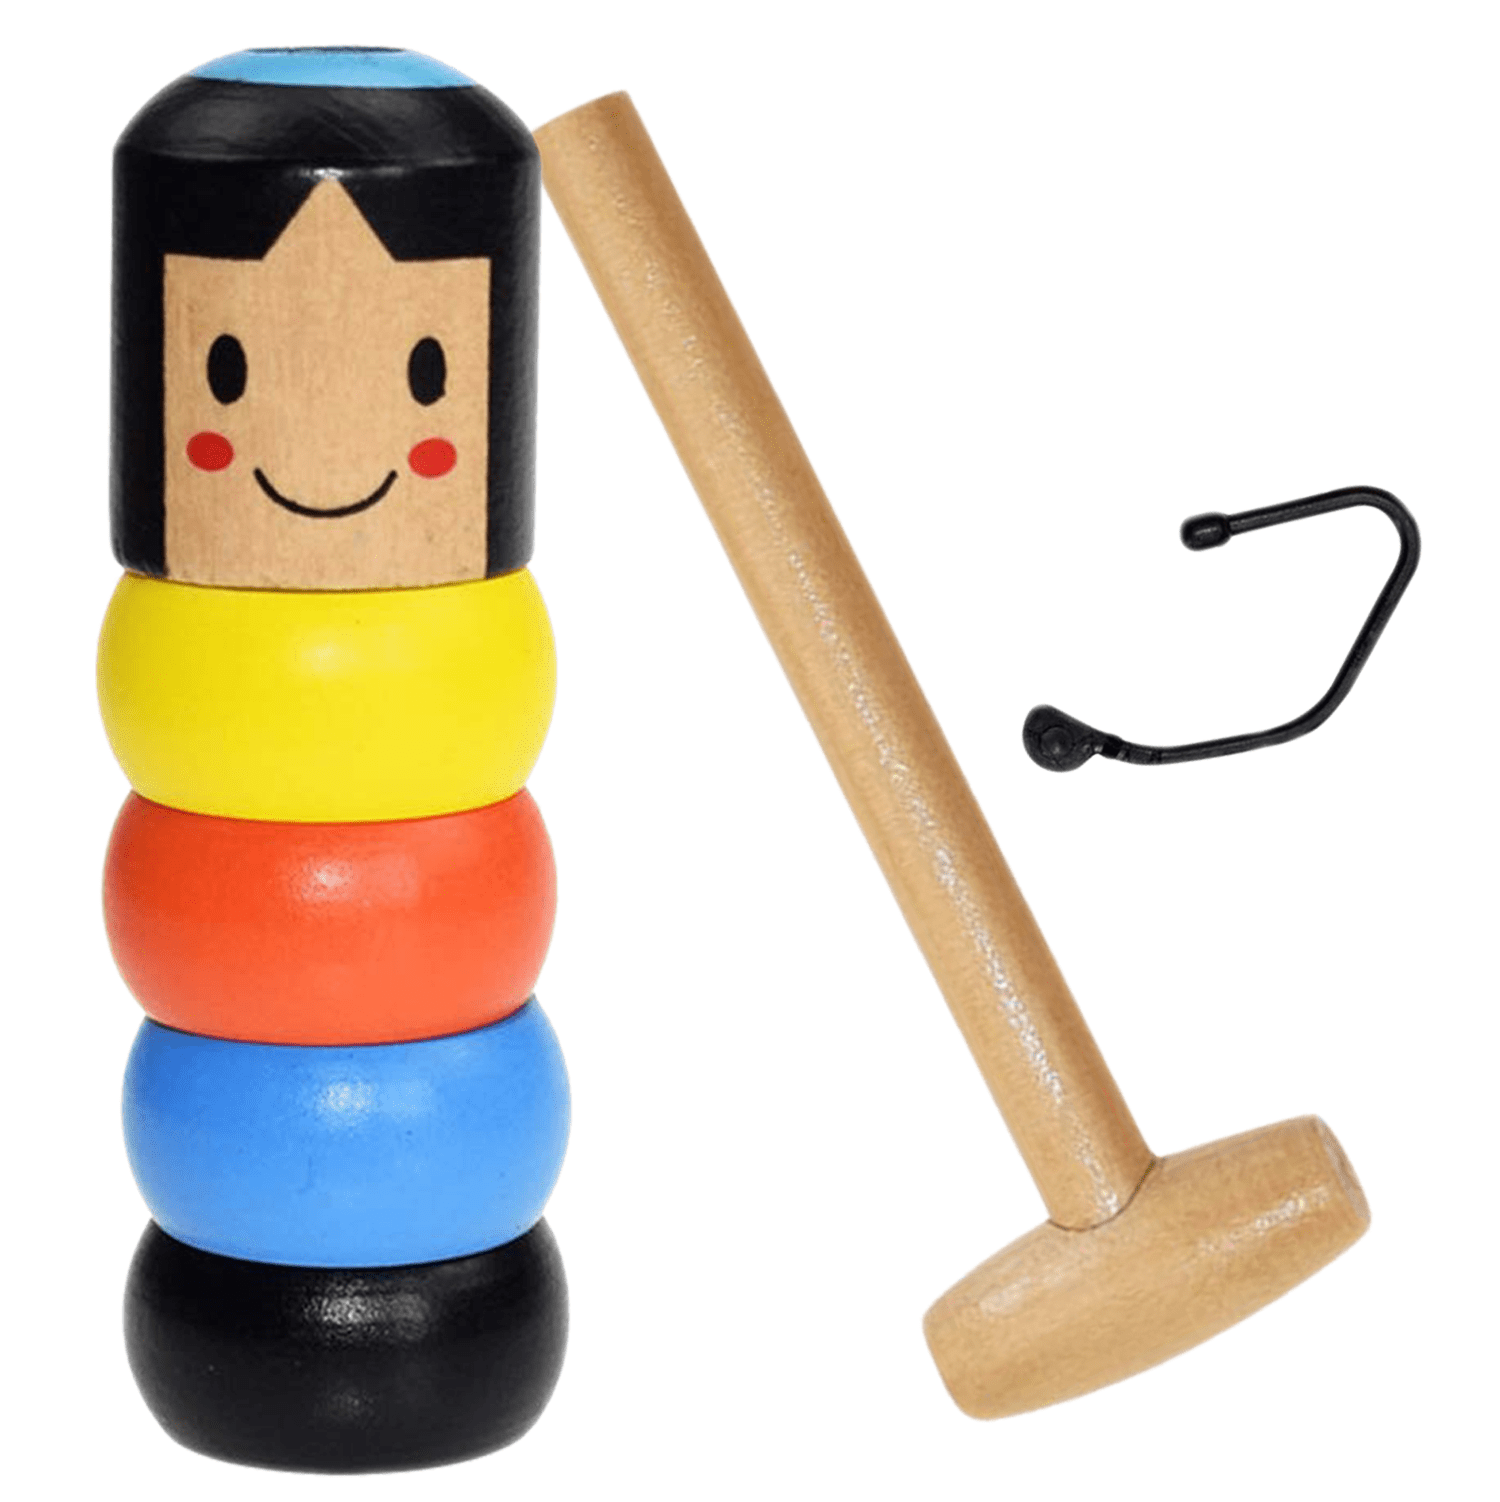 Unbreakable wooden Man Magic Toy 50% OFF ONLY TODAY 